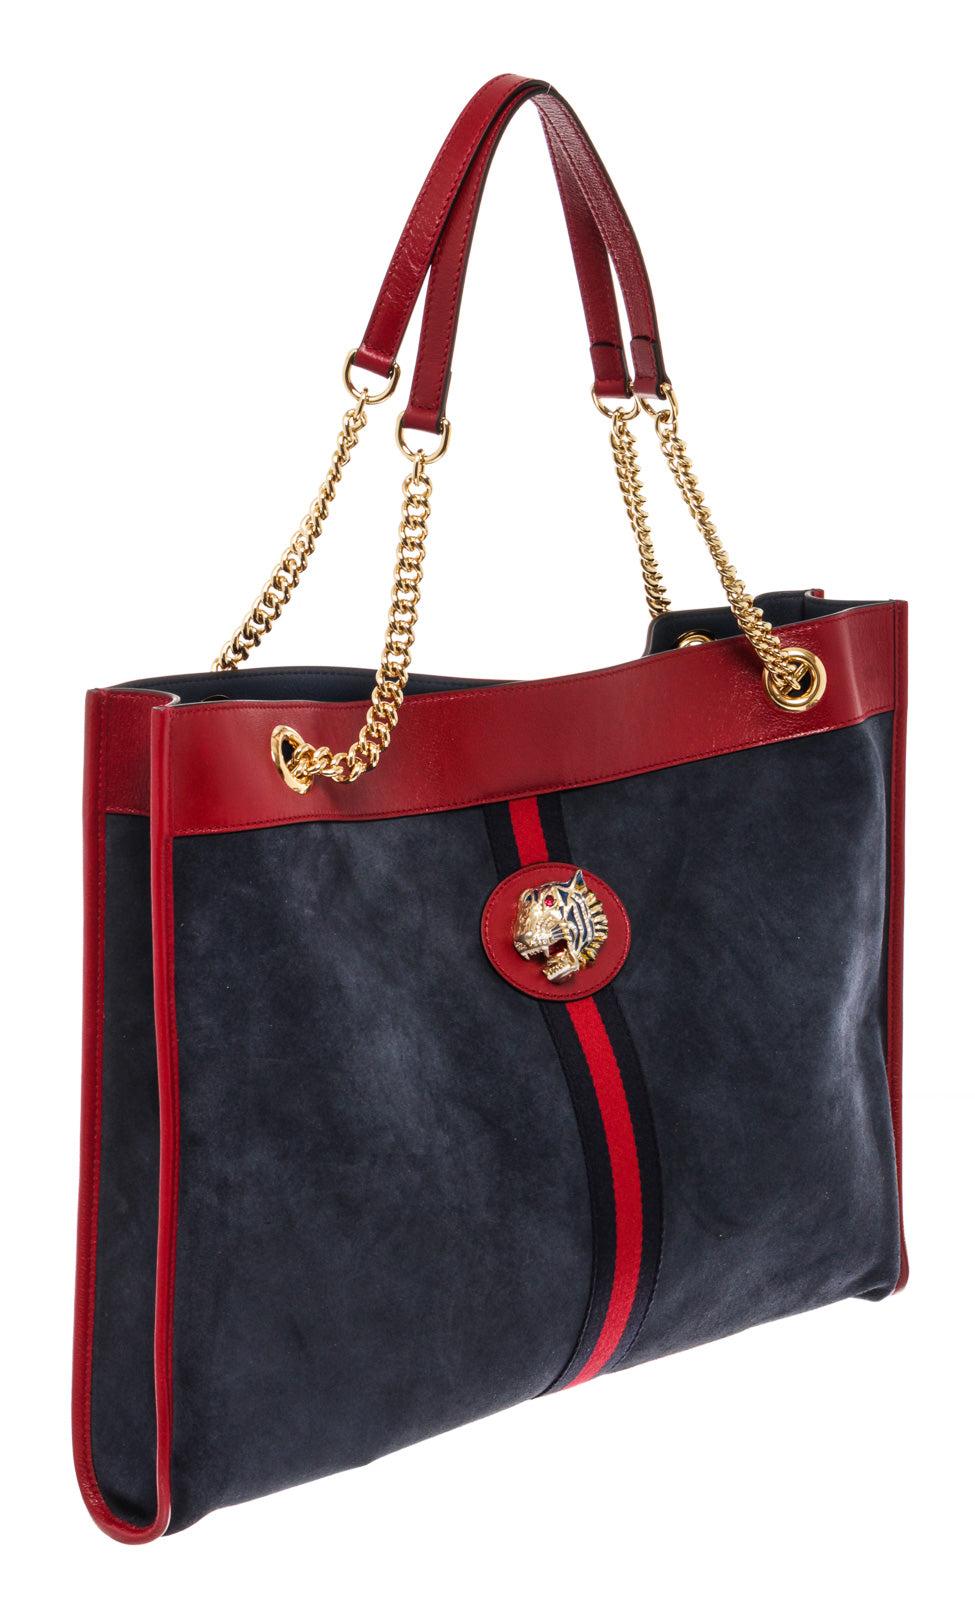 Navy blue suede and red leather Gucci Large Suede Rajah tote bag with gold-tone hardware, dual chain-link shoulder straps with leather shoulder guards, crystal-embellished lion head spur adornment at front face, tonal leather lining and open top.

